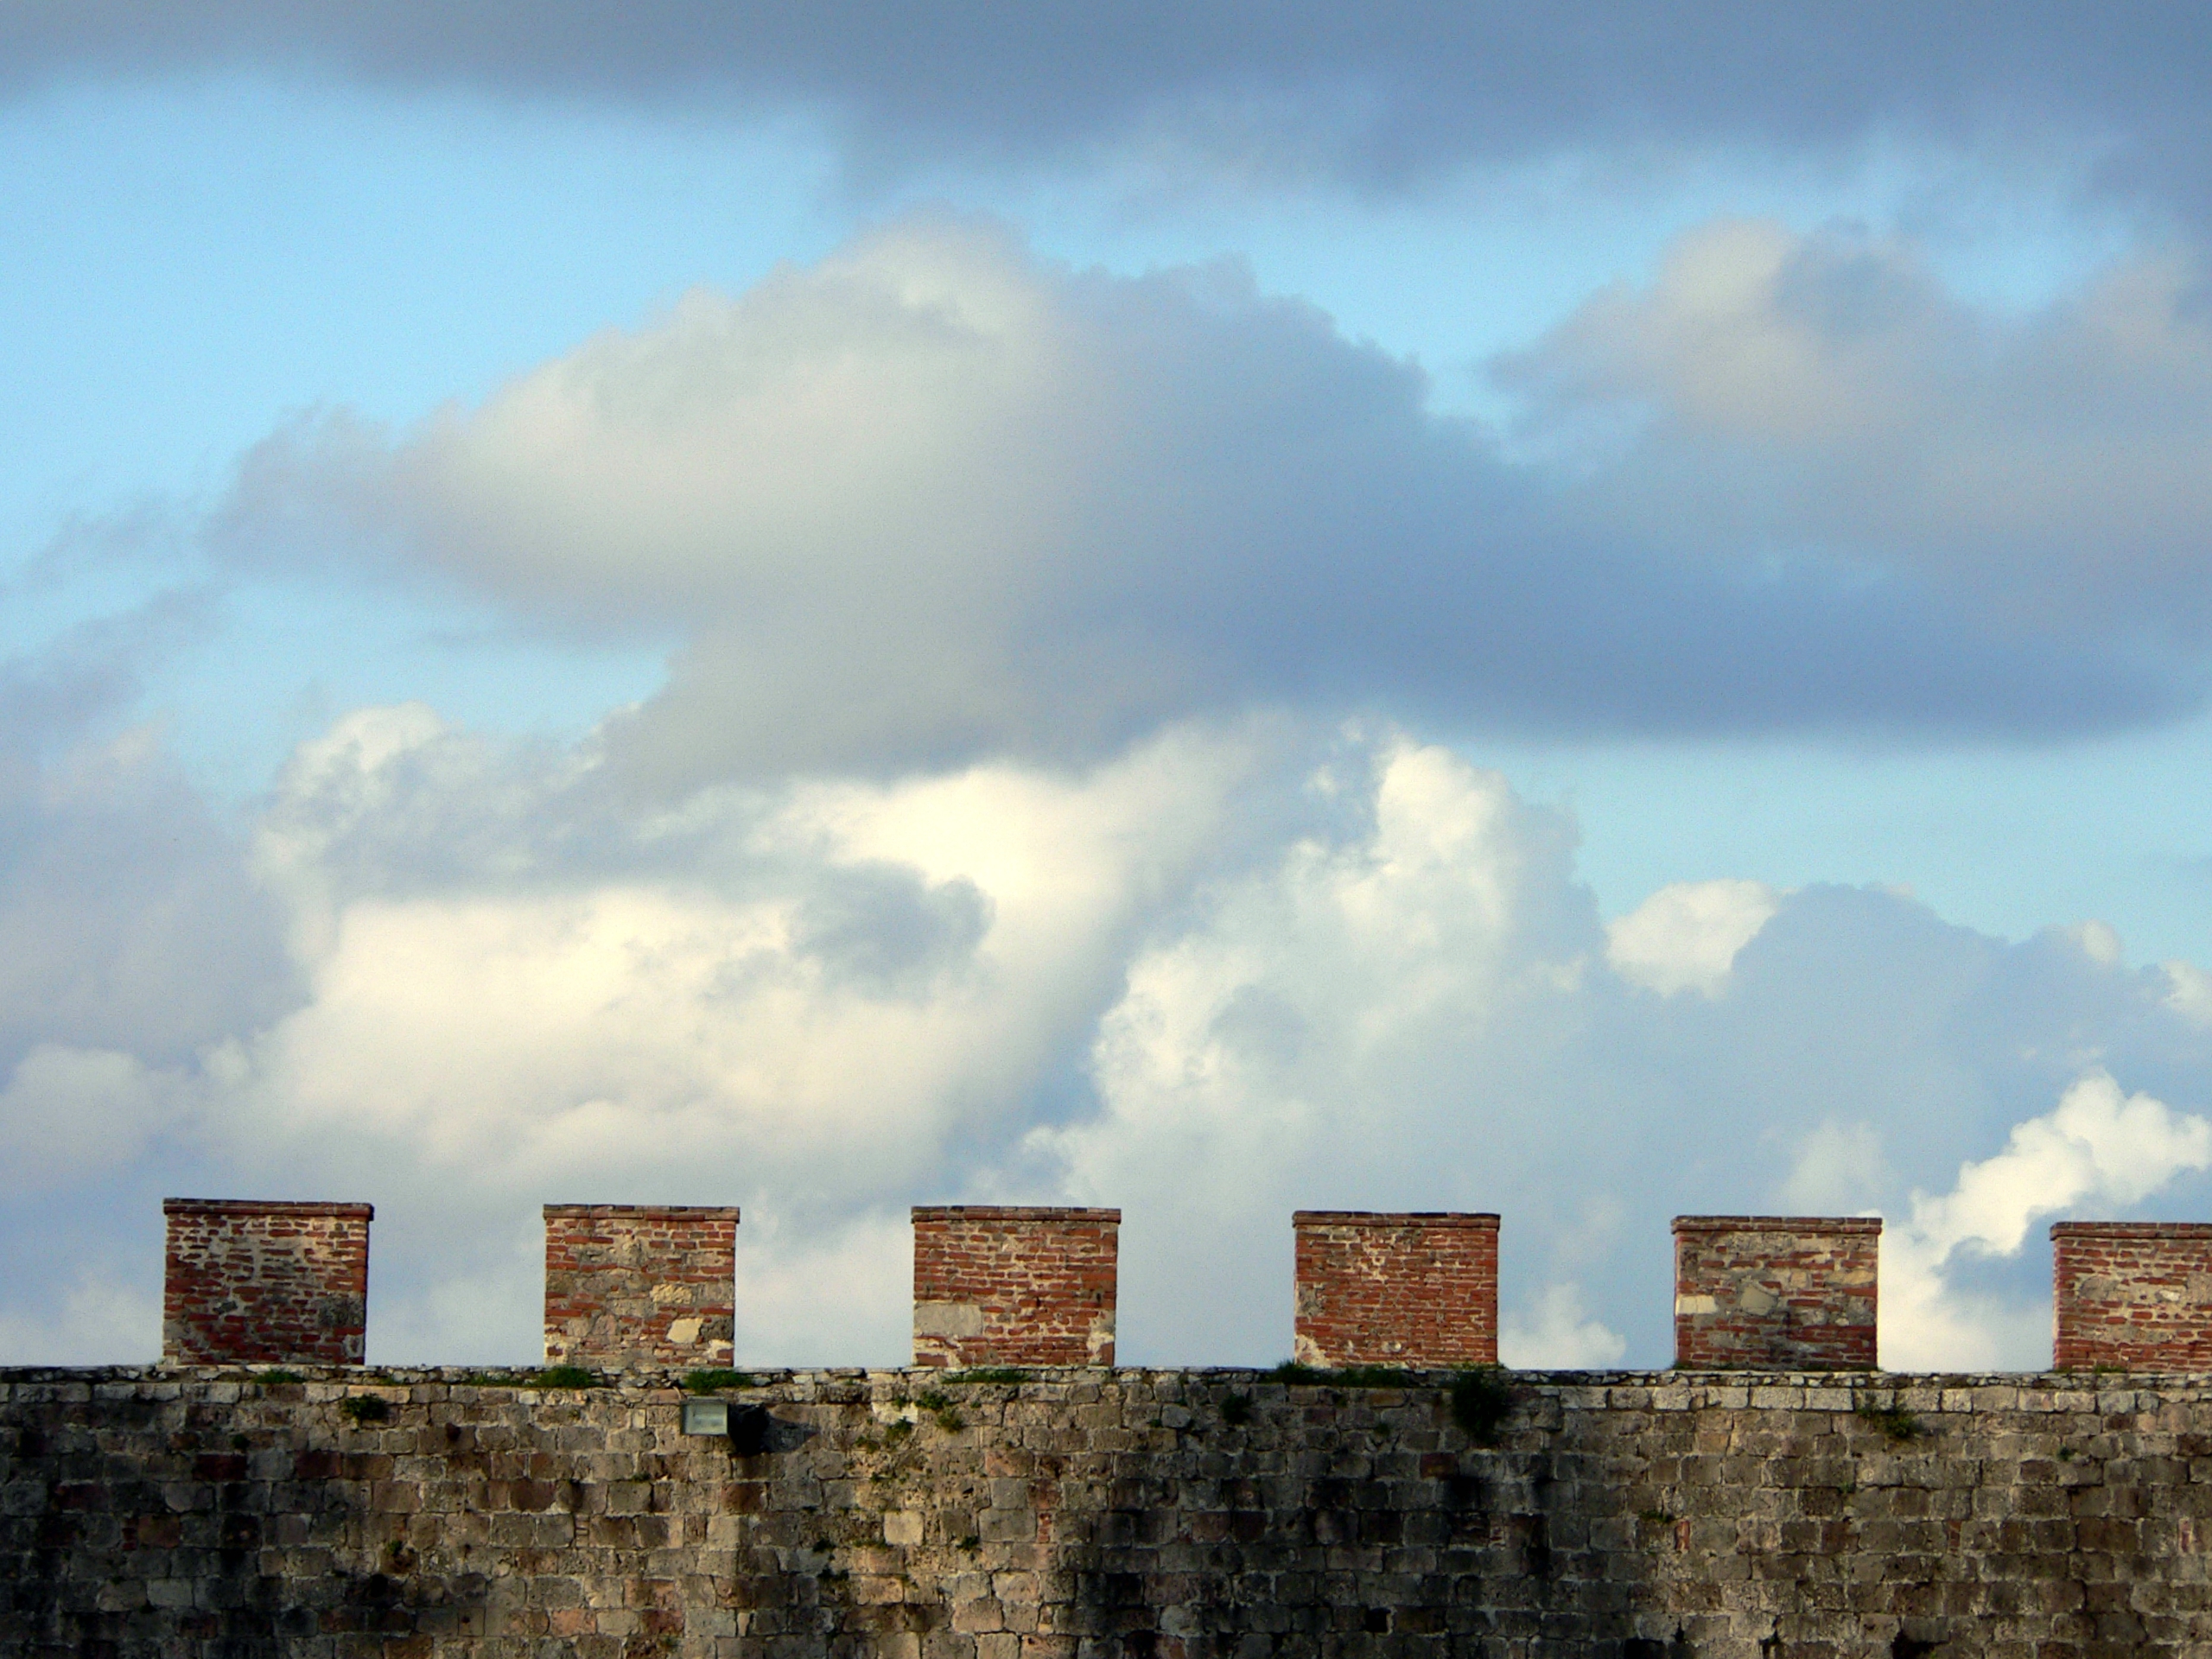 A castle wall and blue sky beyond